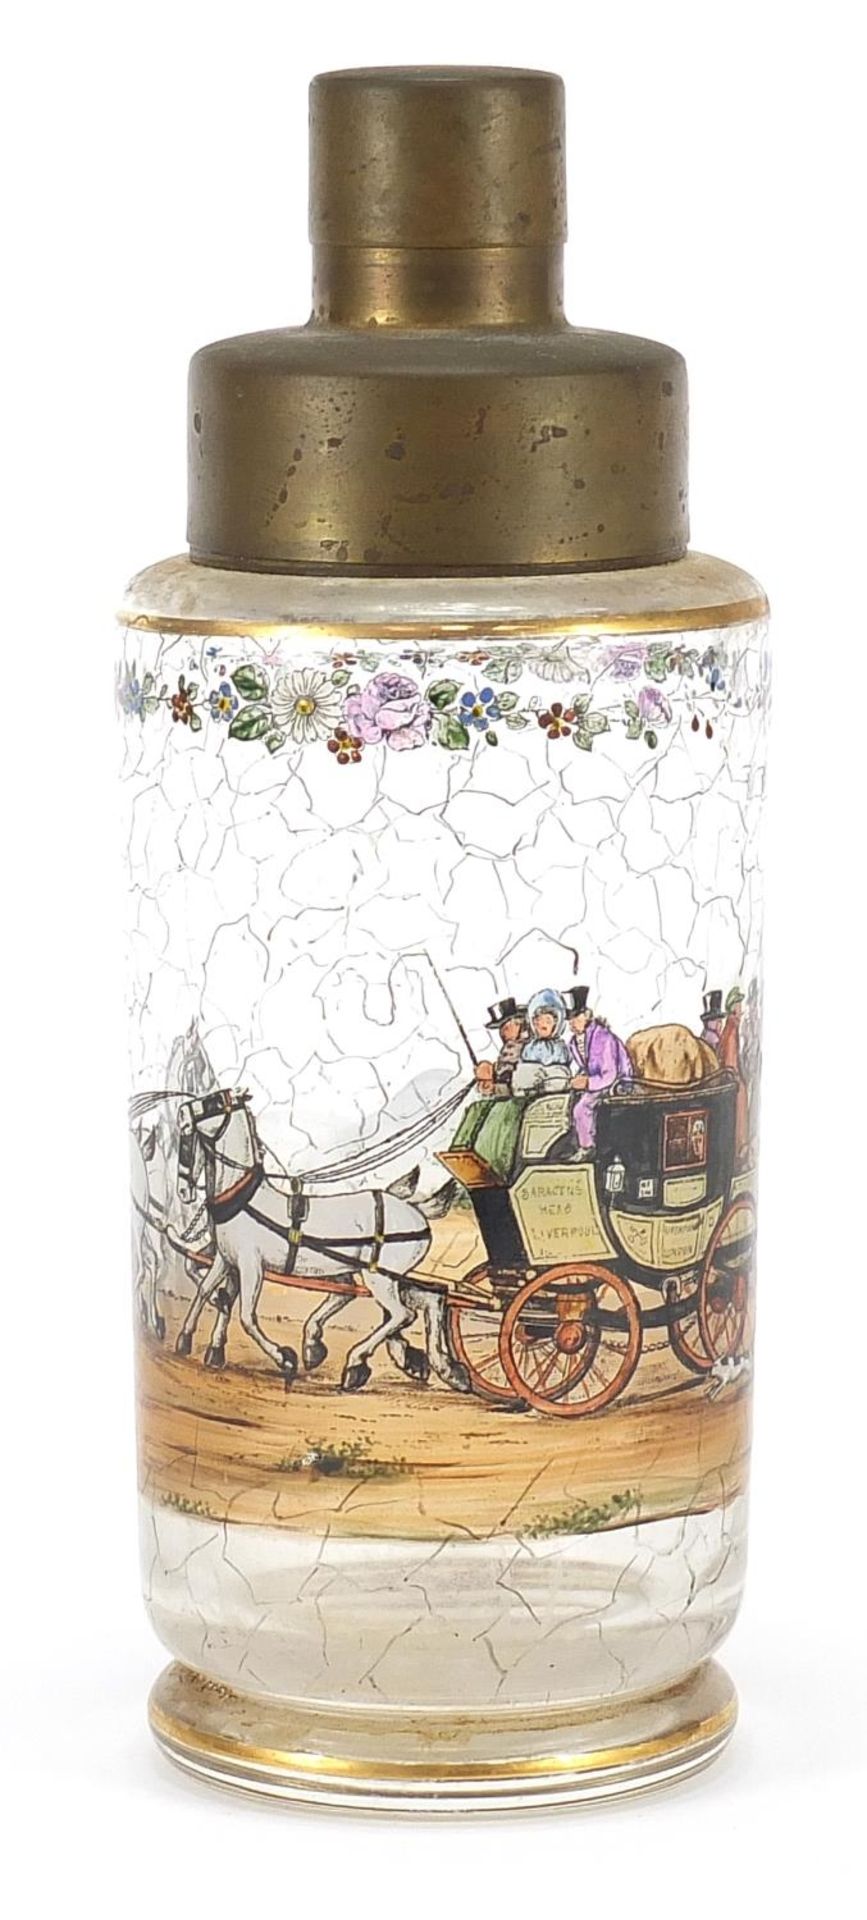 Early 20th century glass cocktail shaker having a picture of a four horse drawn carriage, the shaker